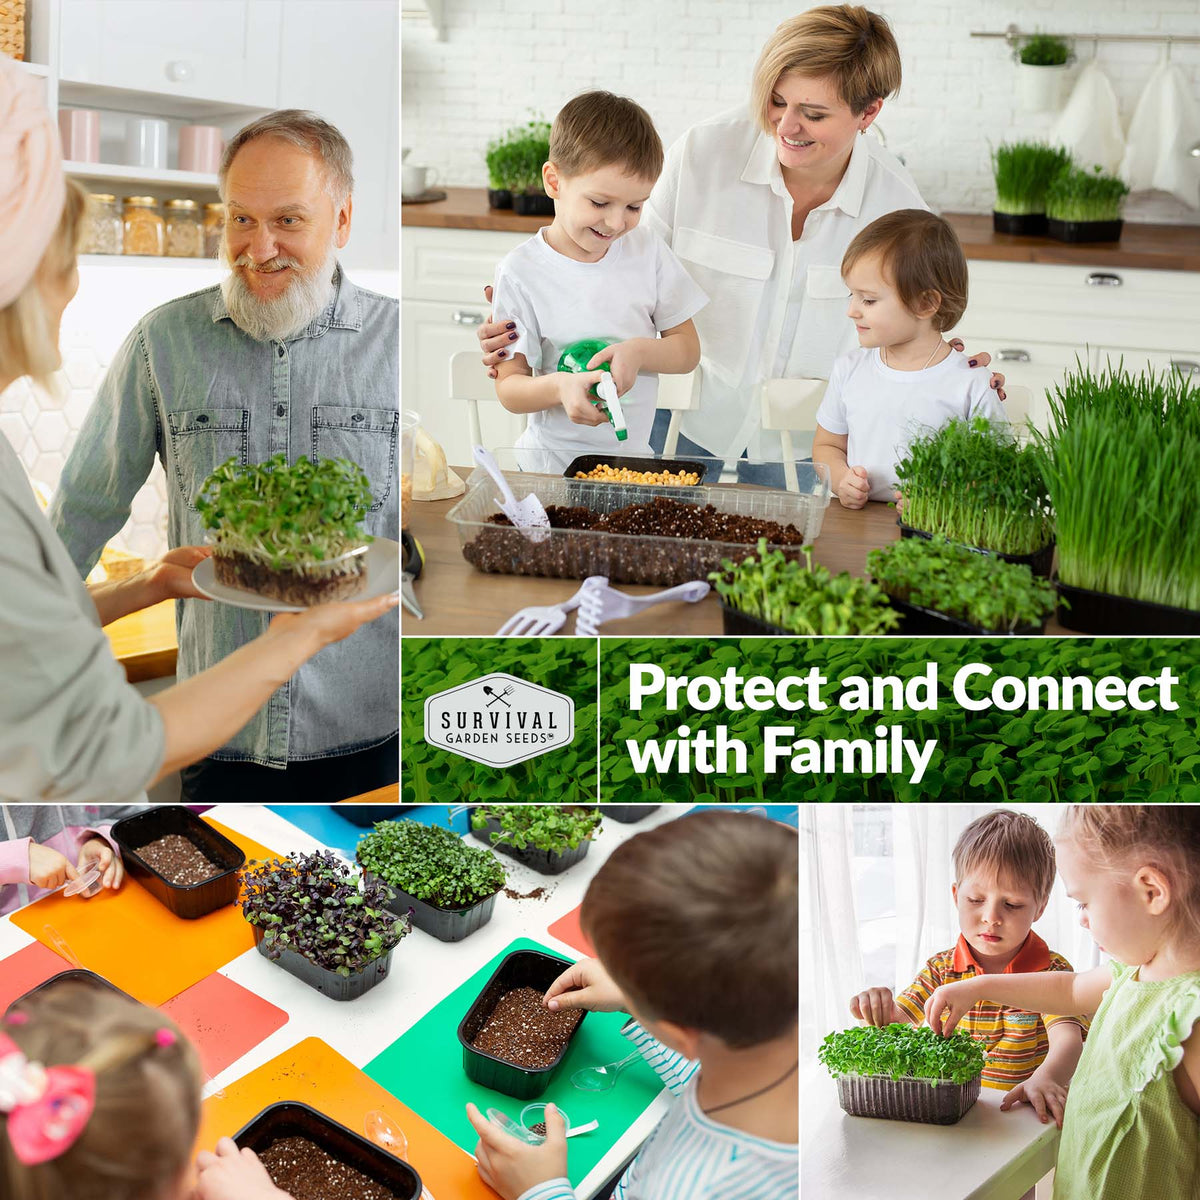 Protect and connect with family sprouting greens